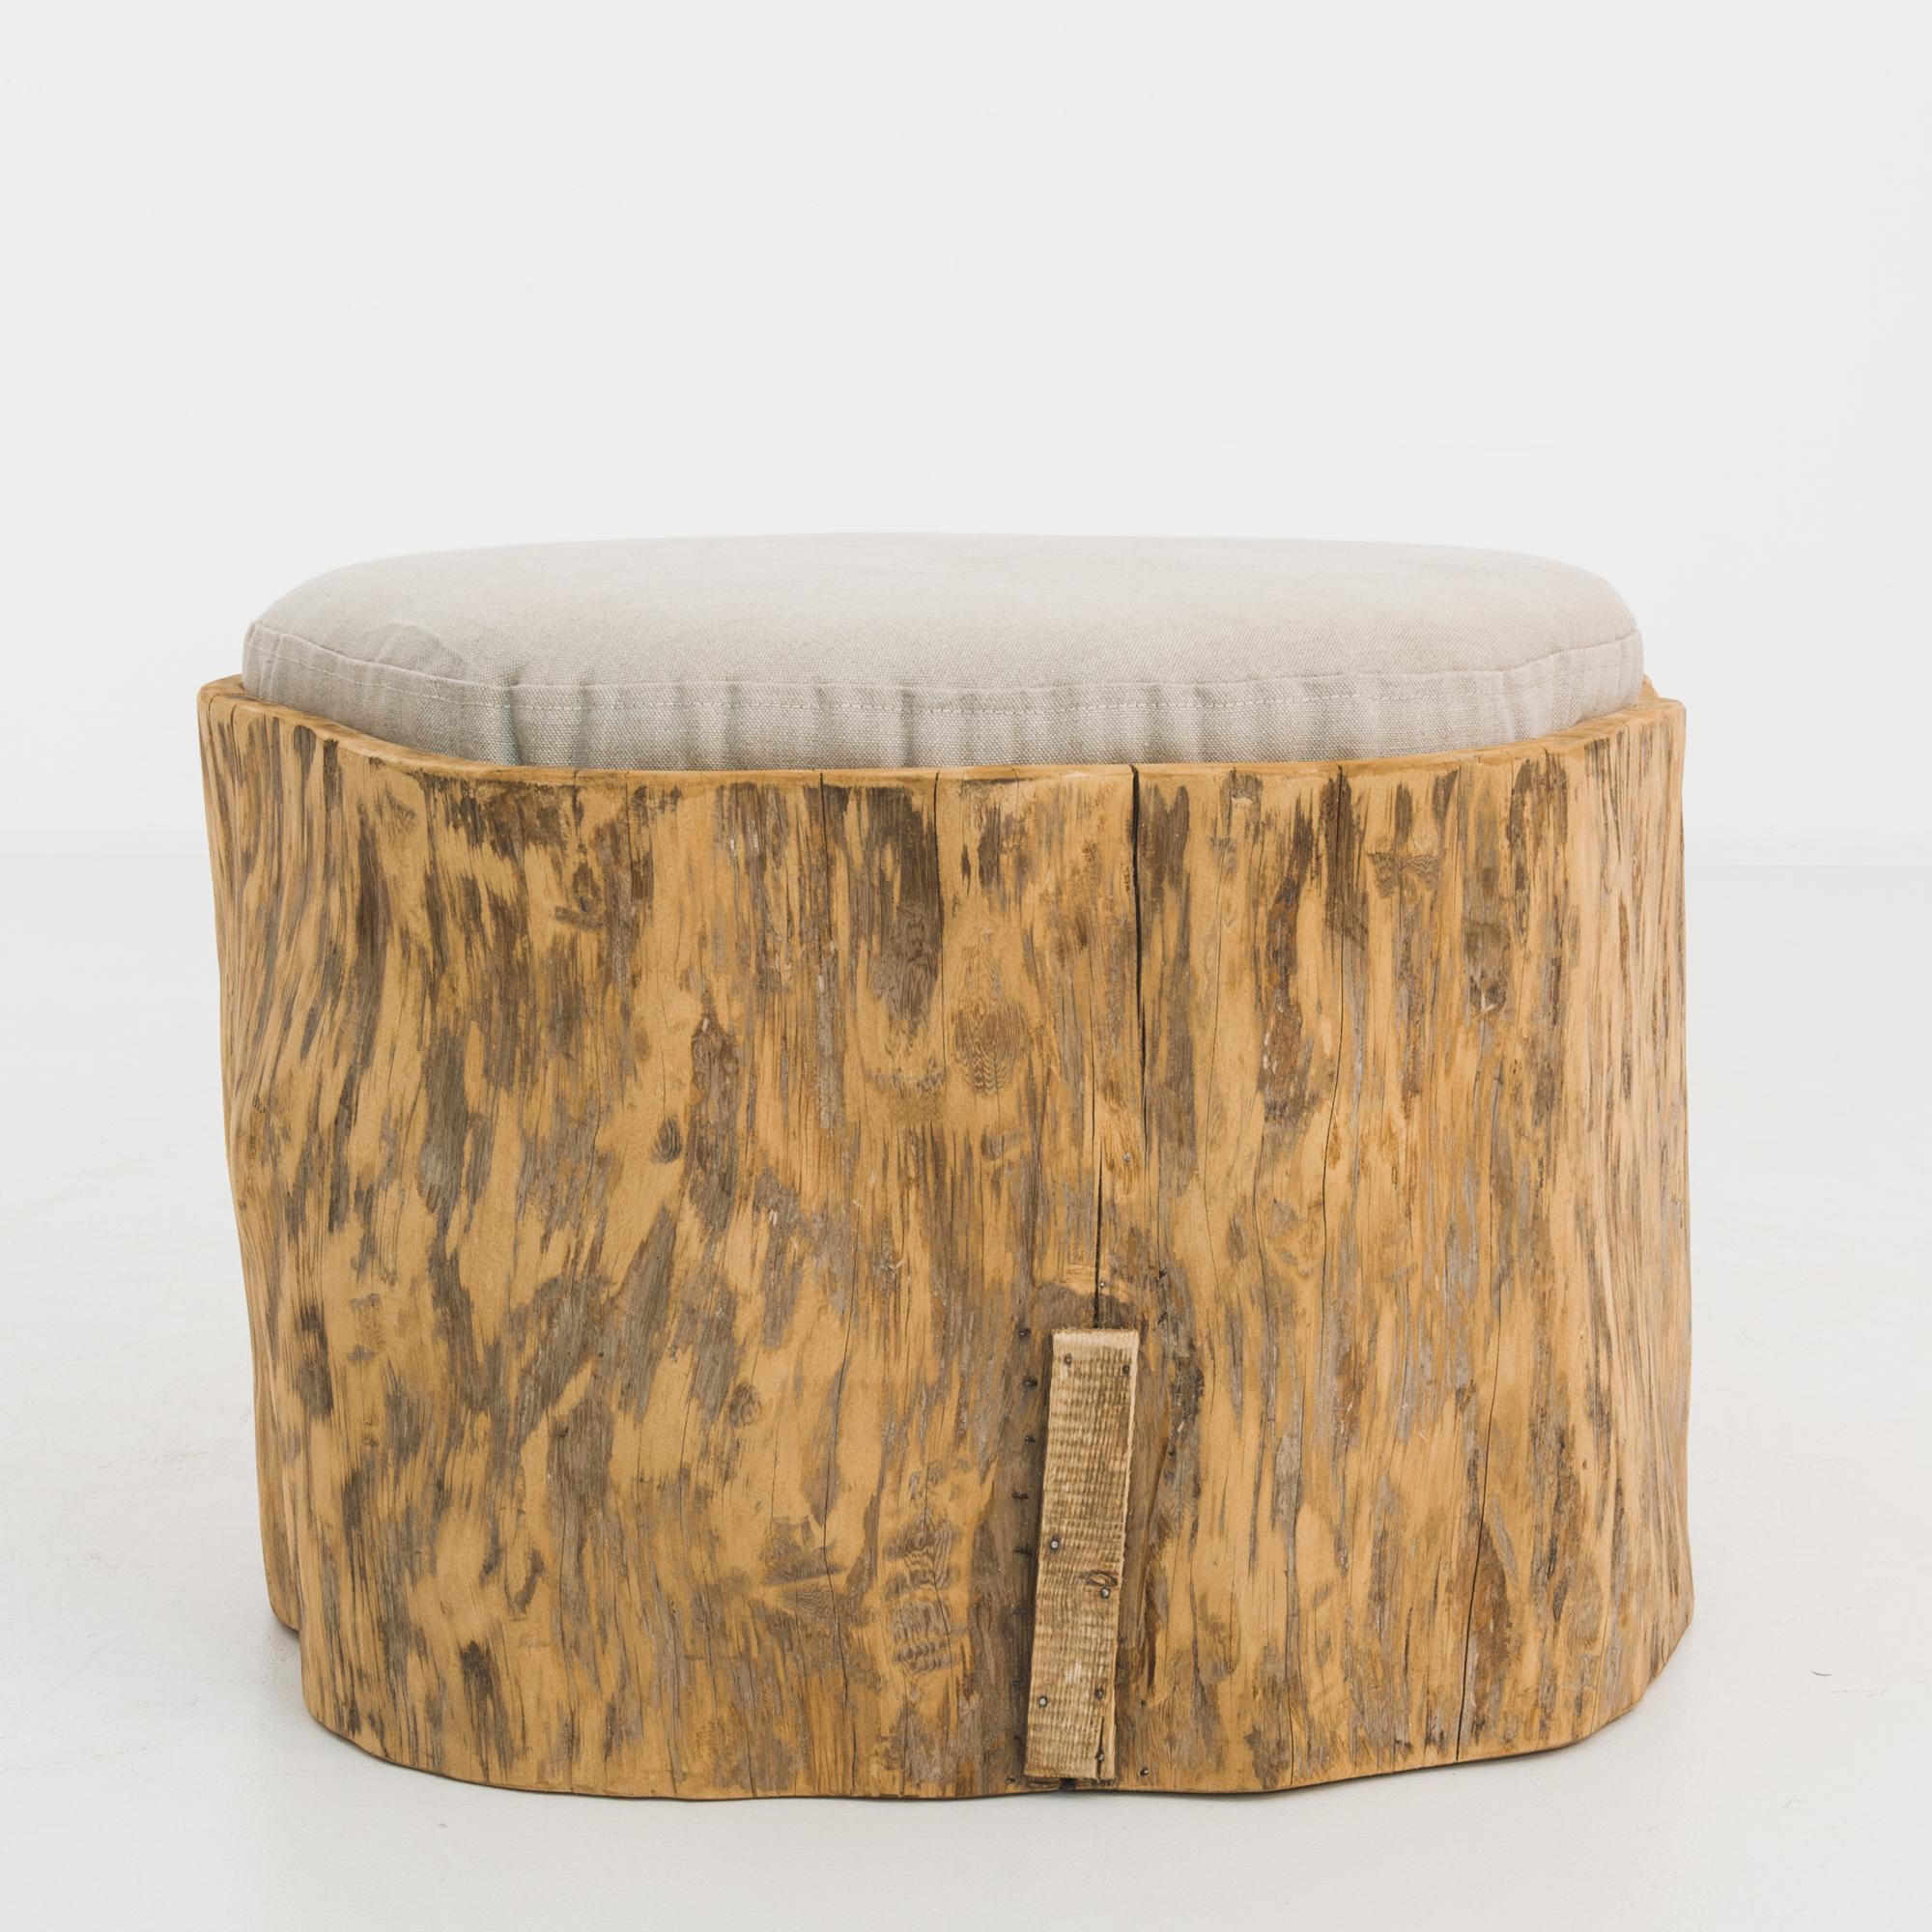 This antique wooden pouf was made in Poland. Crafted from a tree trunk, the smooth patina and variegated tones of gray and flaxen offer warmth and a rustic charm. Accompanied by a newly upholstered cushion in an ecru shade for comfort and style.